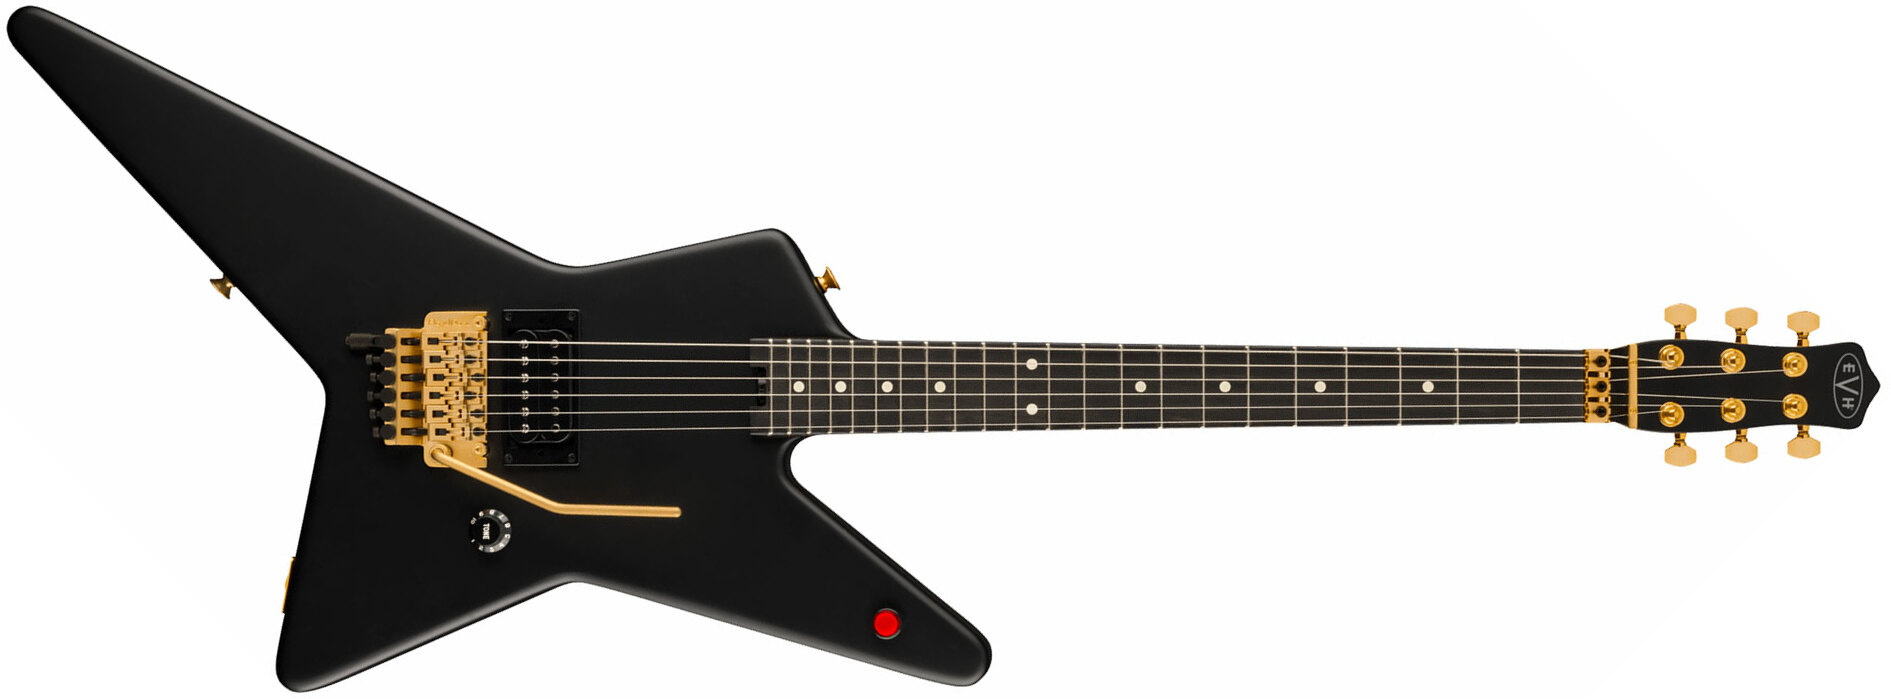 Evh Star Limited Edition 1h Fr Eb - Stealth Black With Gold Hardware - Guitarra electrica metalica - Main picture